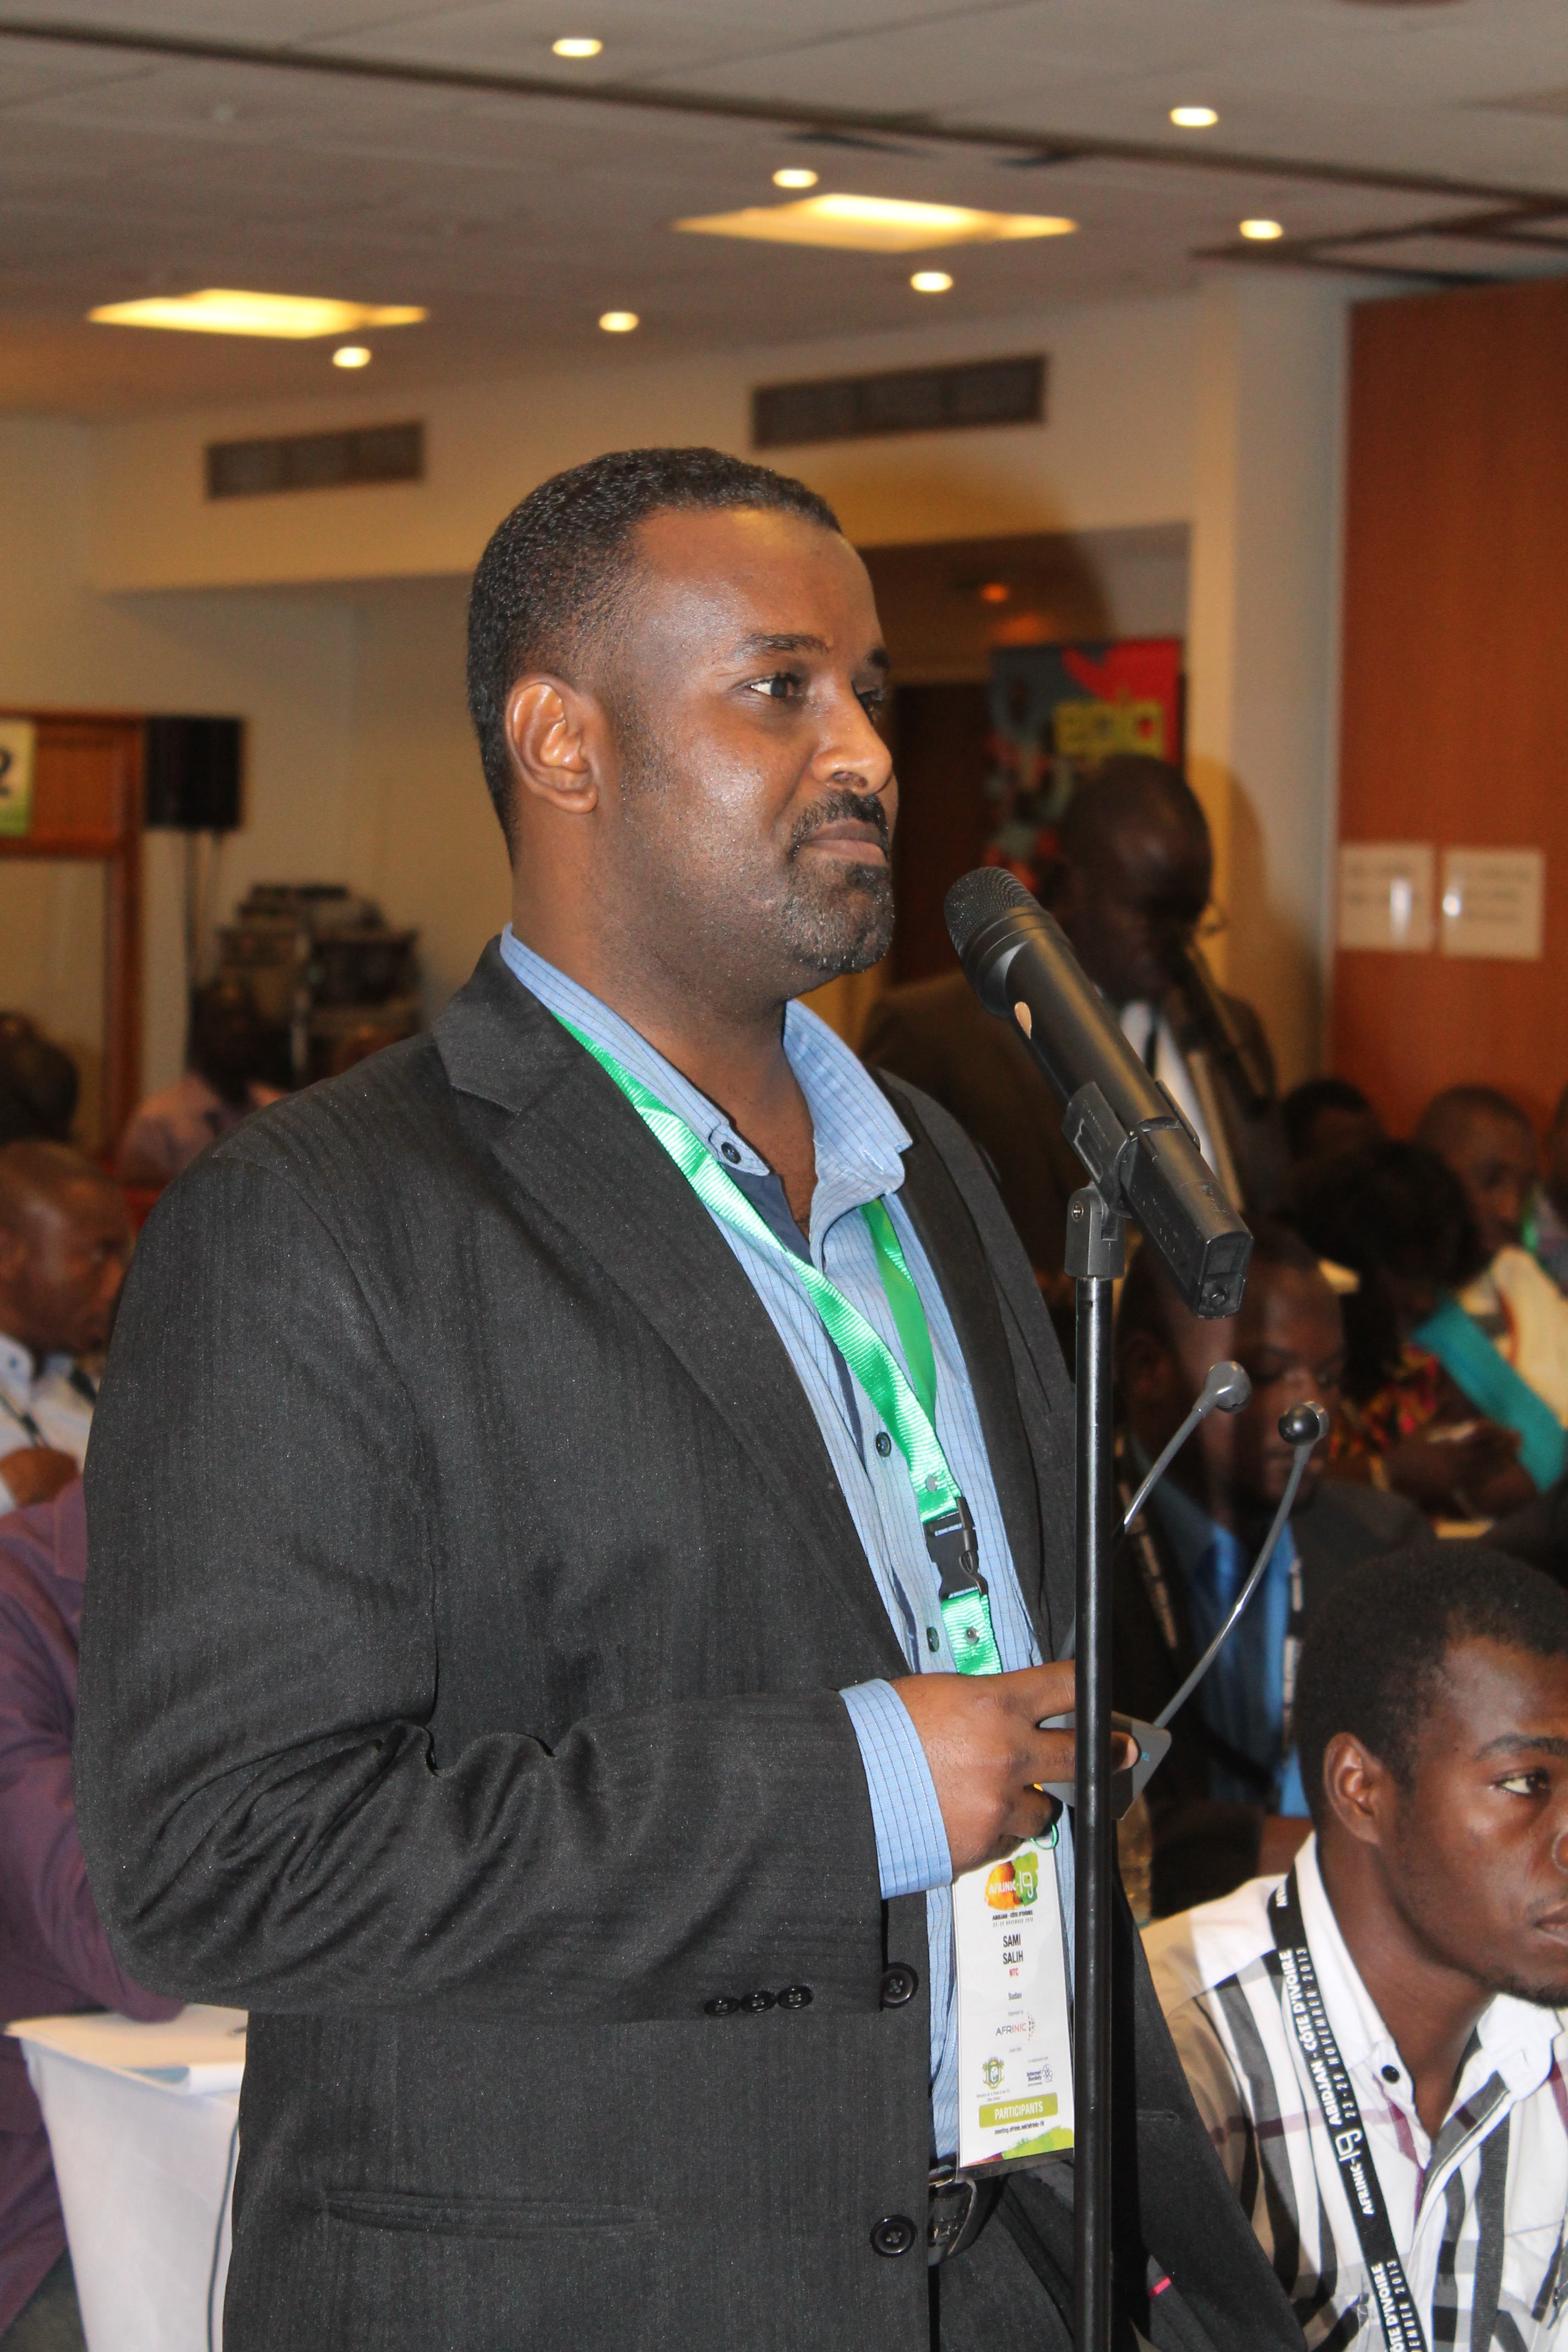 AfriSIG2015: “We Africans need to manage our own resources”